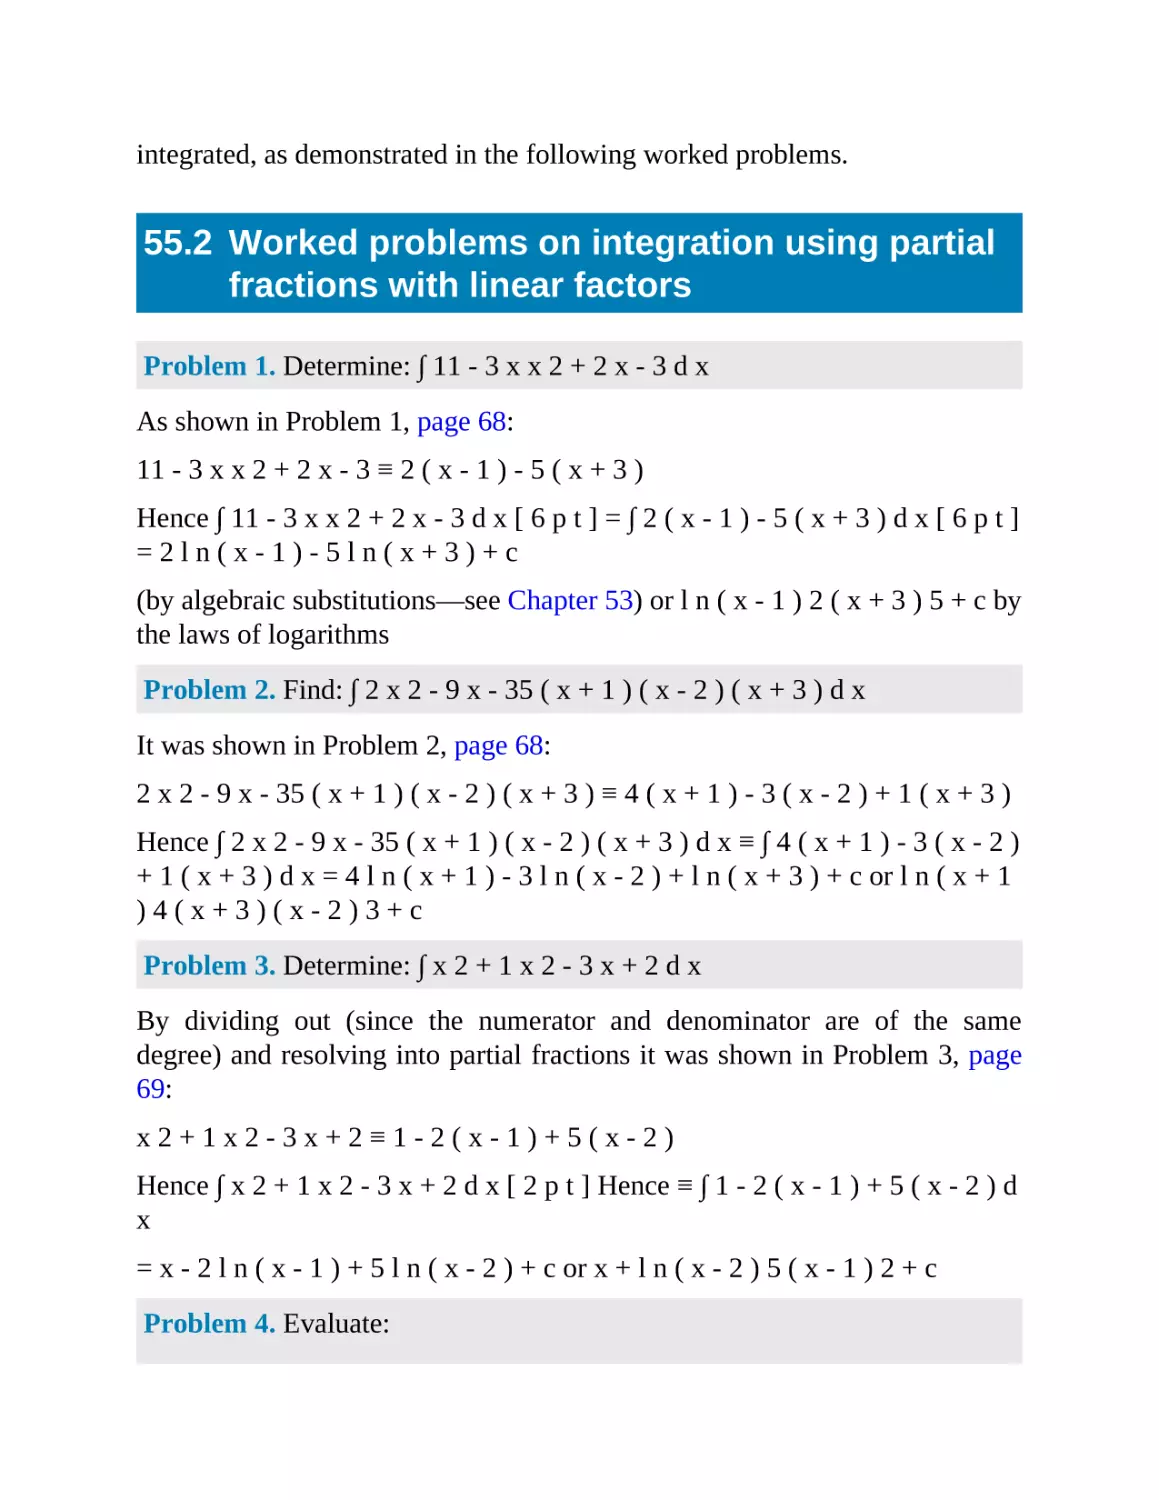 55.2 Worked problems on integration using partial fractions with linear factors